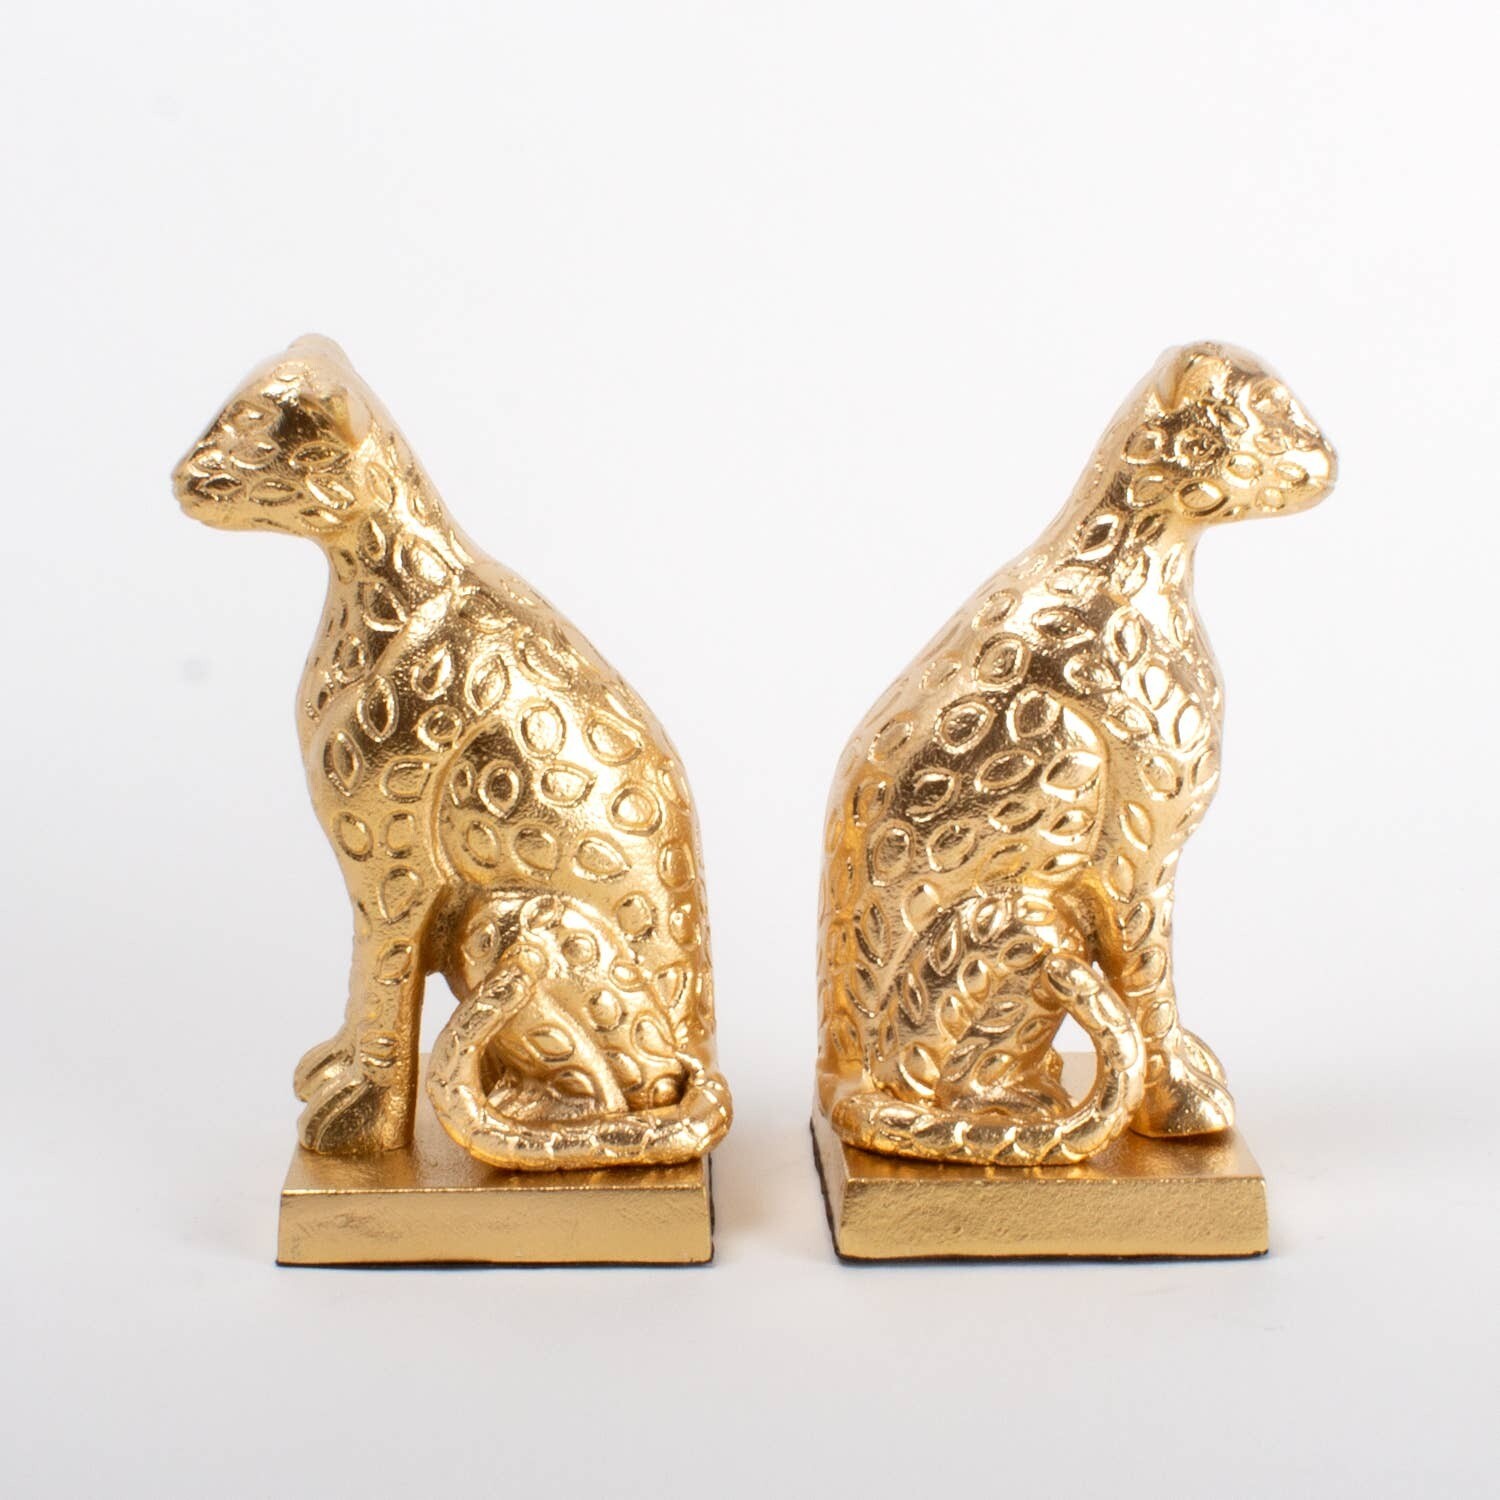 Leopard Bookends S/2